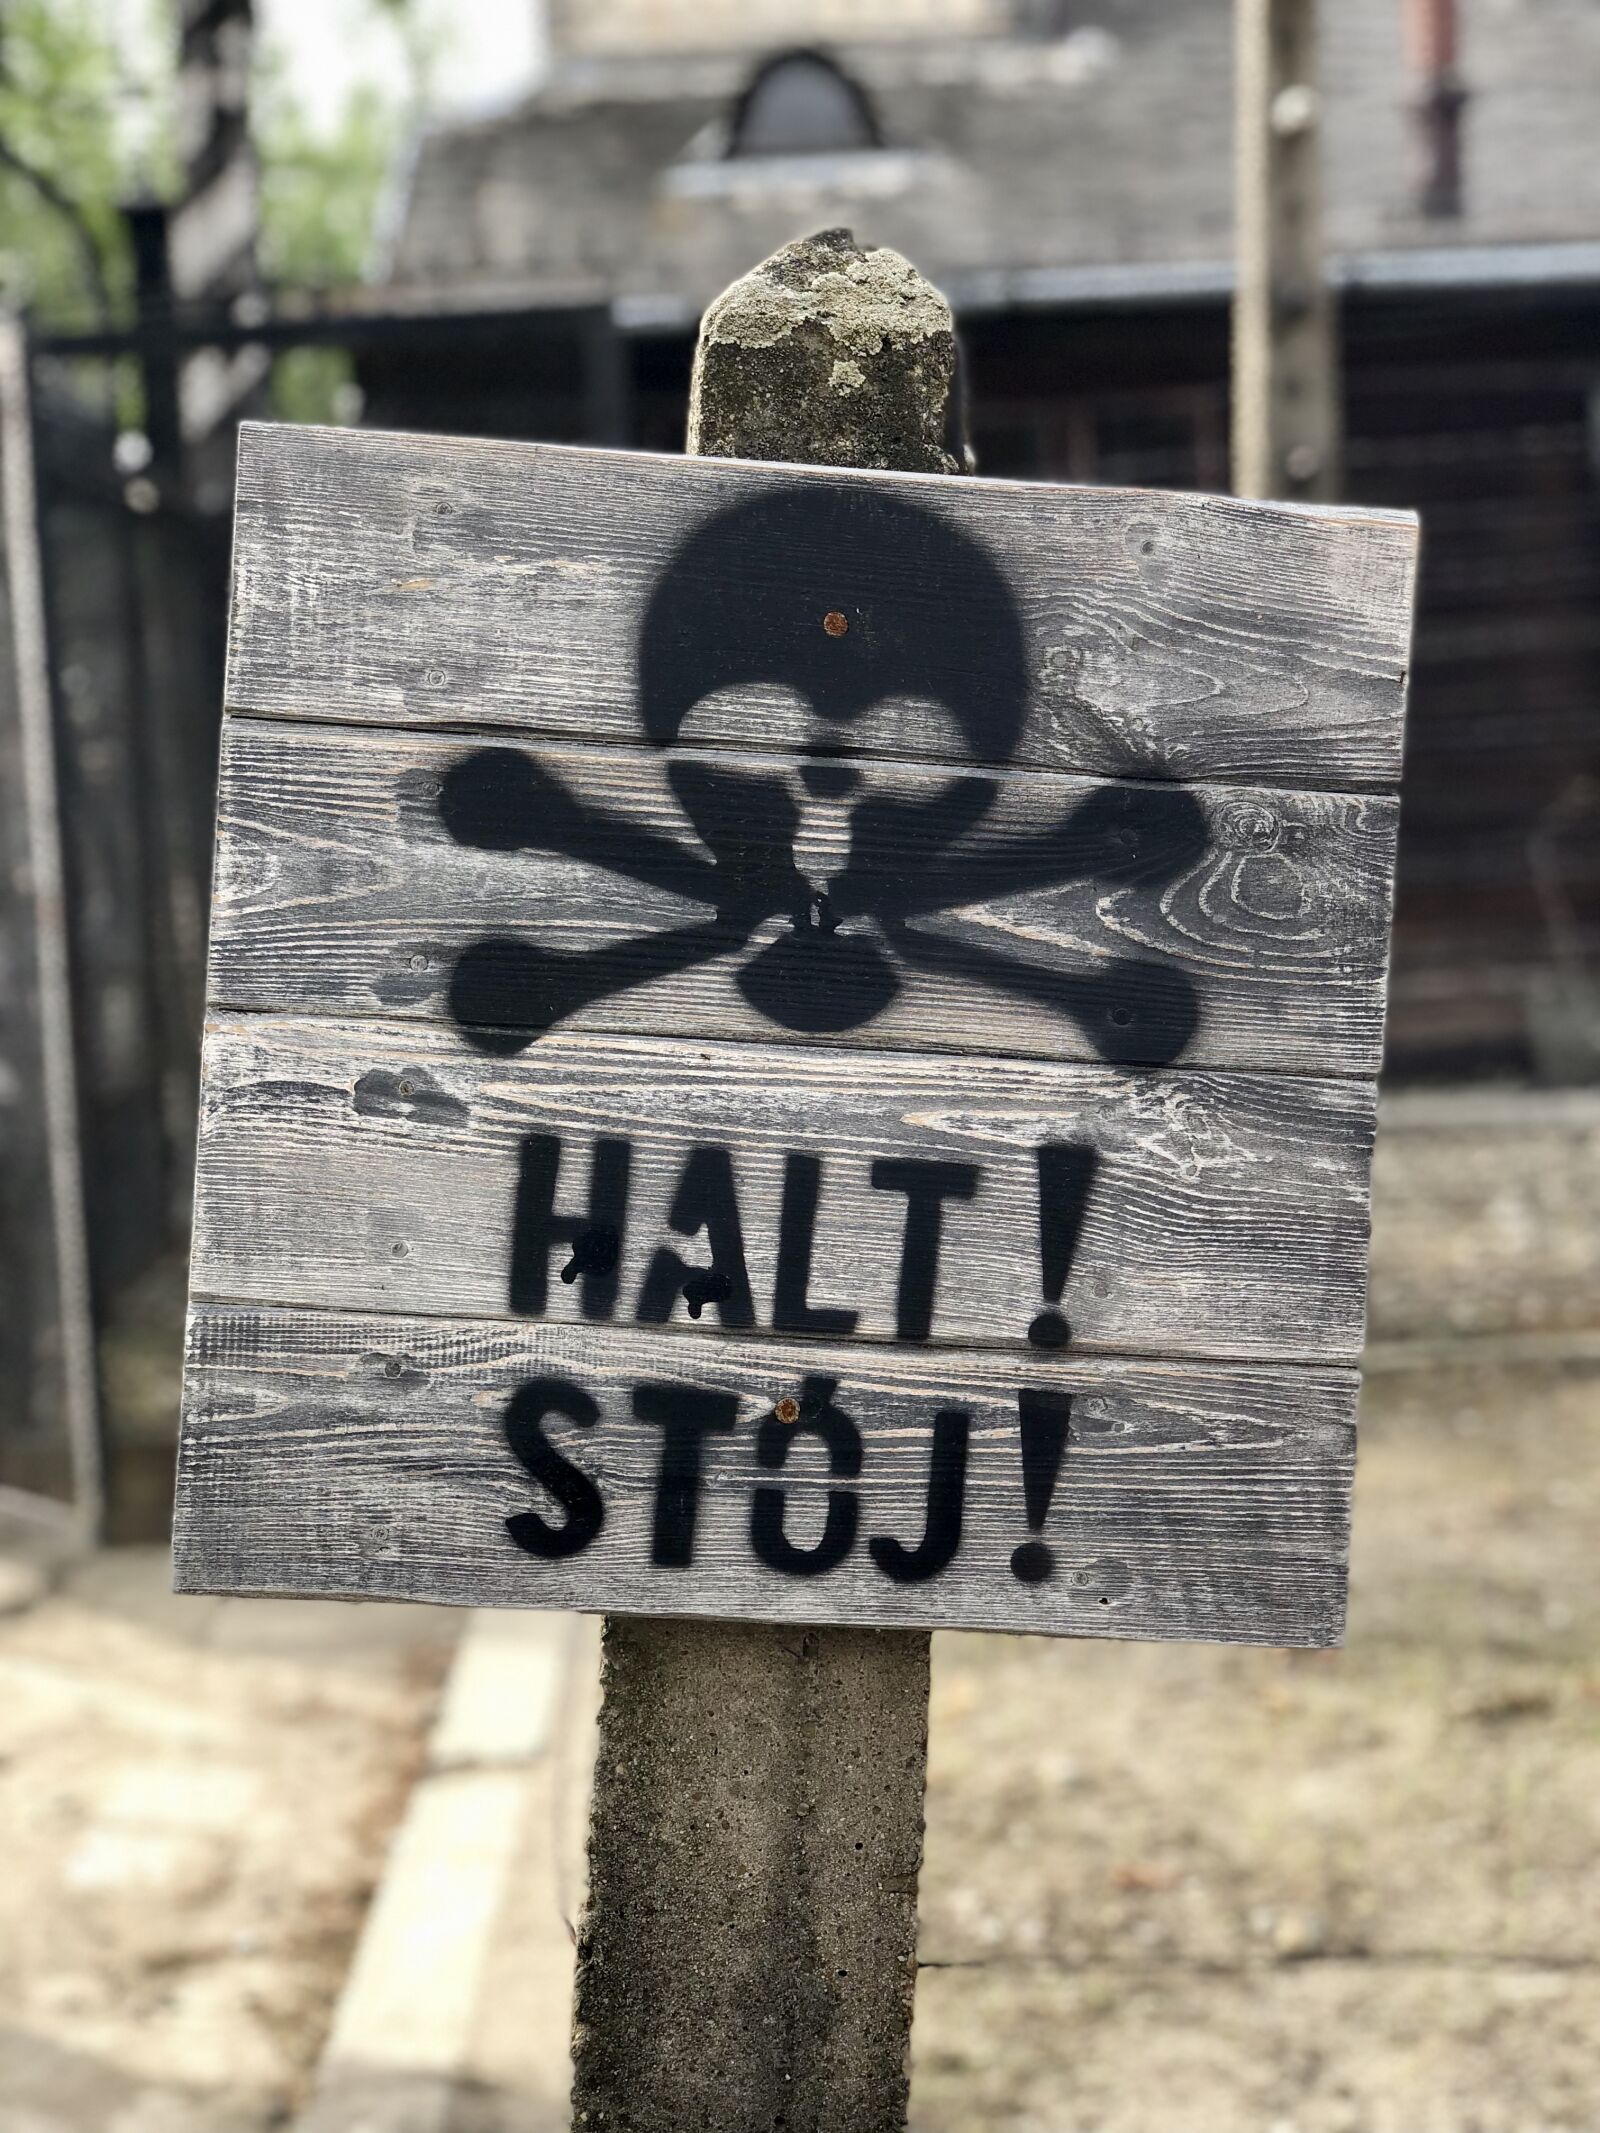 iPhone X back dual camera 6mm f/2.4 sample photo. Auschwitz, sign, stop photography